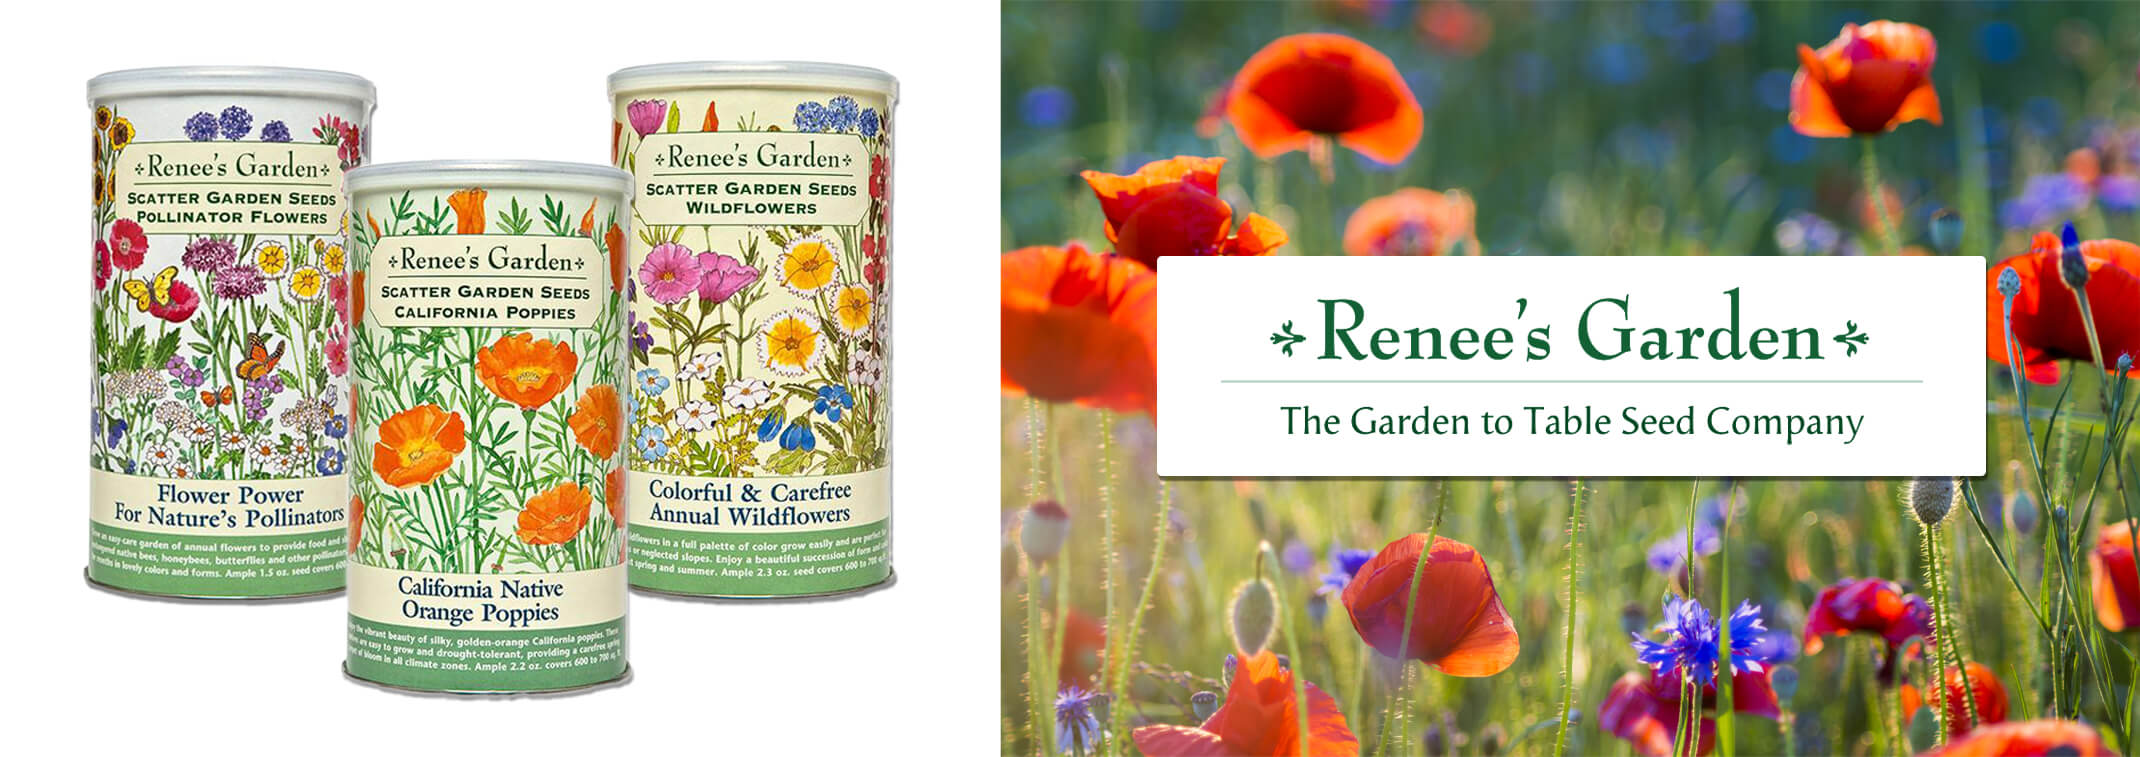 2 images: the first has 3 different containers of Renee's Gardens Native flower seed mixes or Wildflower mixes; the second image is a field of wildflowers, primarily consisting of bright orange-red poppies and purple Barchelor's buttons with a white box in the center of the image with Renee's Garden Seed logo inside it, along with the text that says 